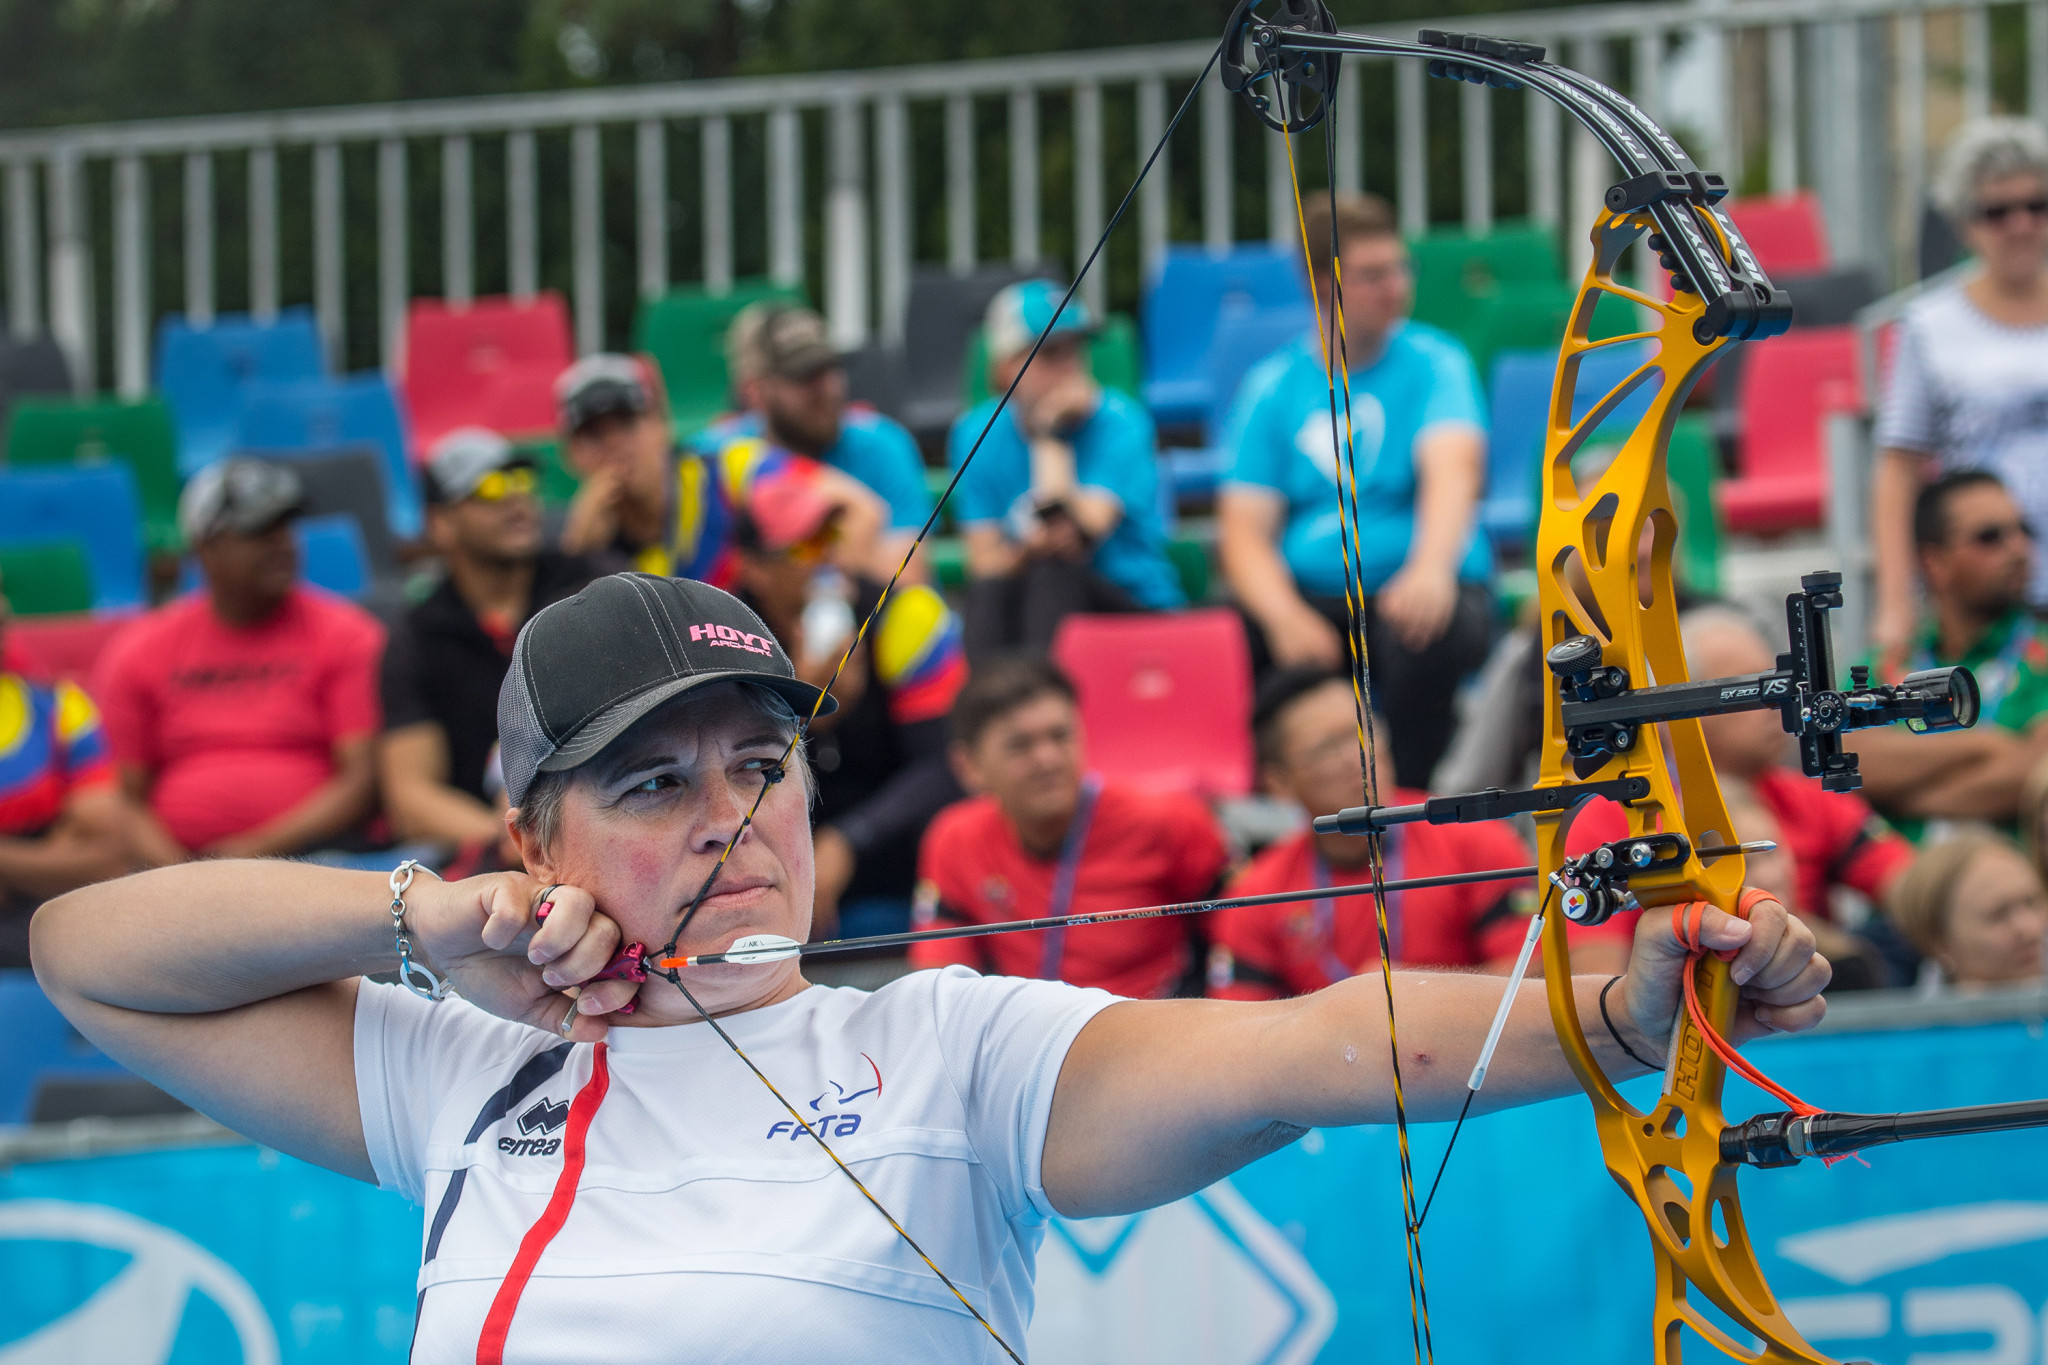 Dodemont and Schloesser win compound titles at World Archery Indoor Series in Luxembourg